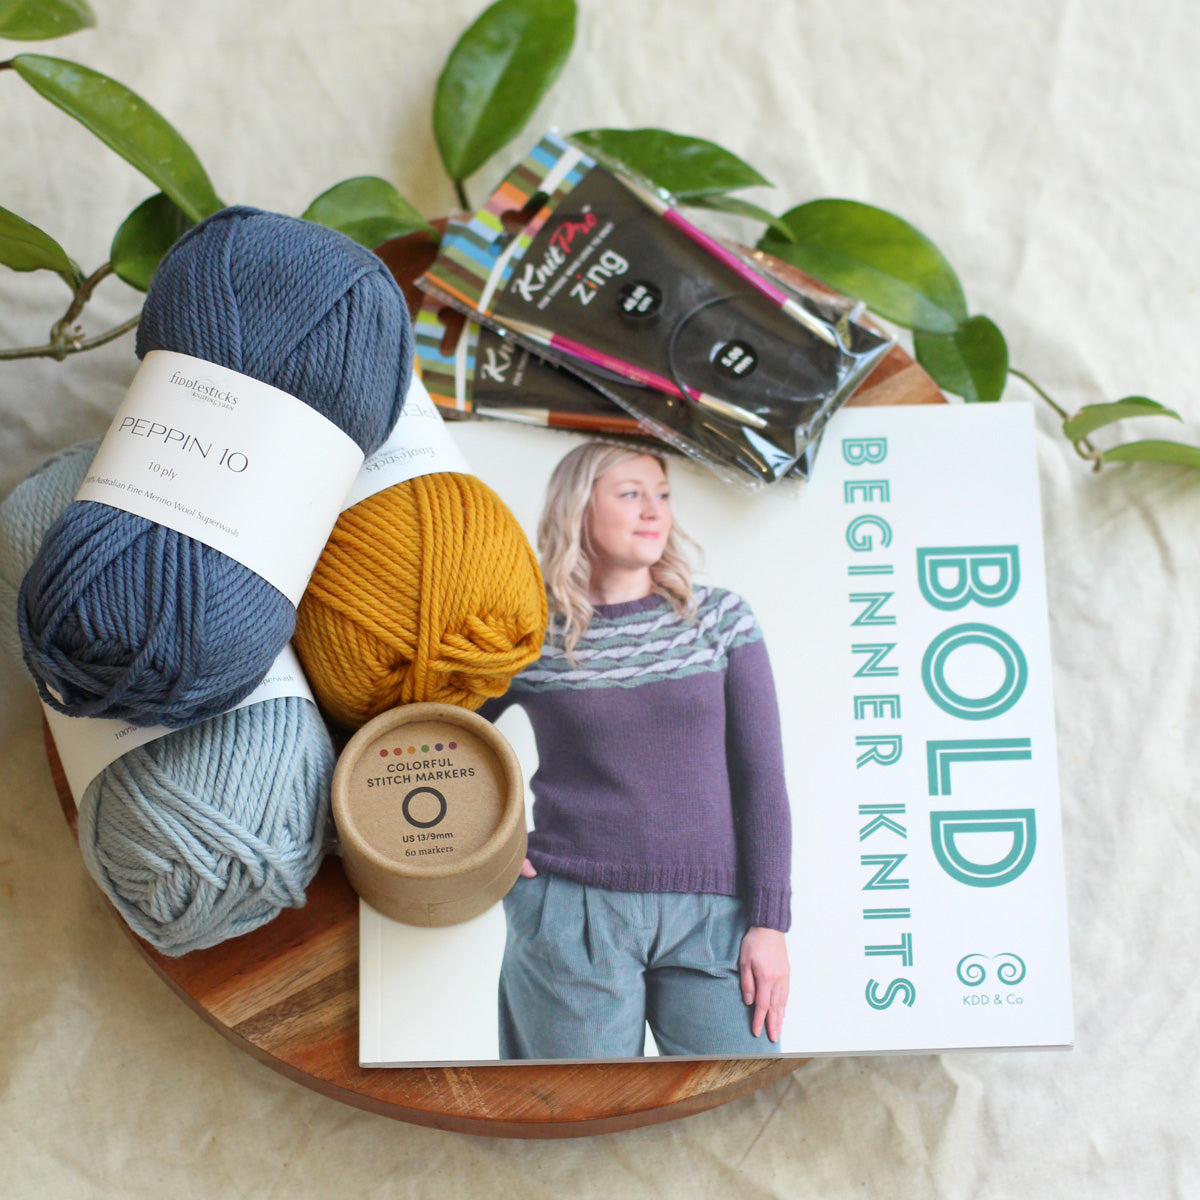 Unique Gifts for Knitters Australia  Knitting Gifts Australia — Say!  Little Hen